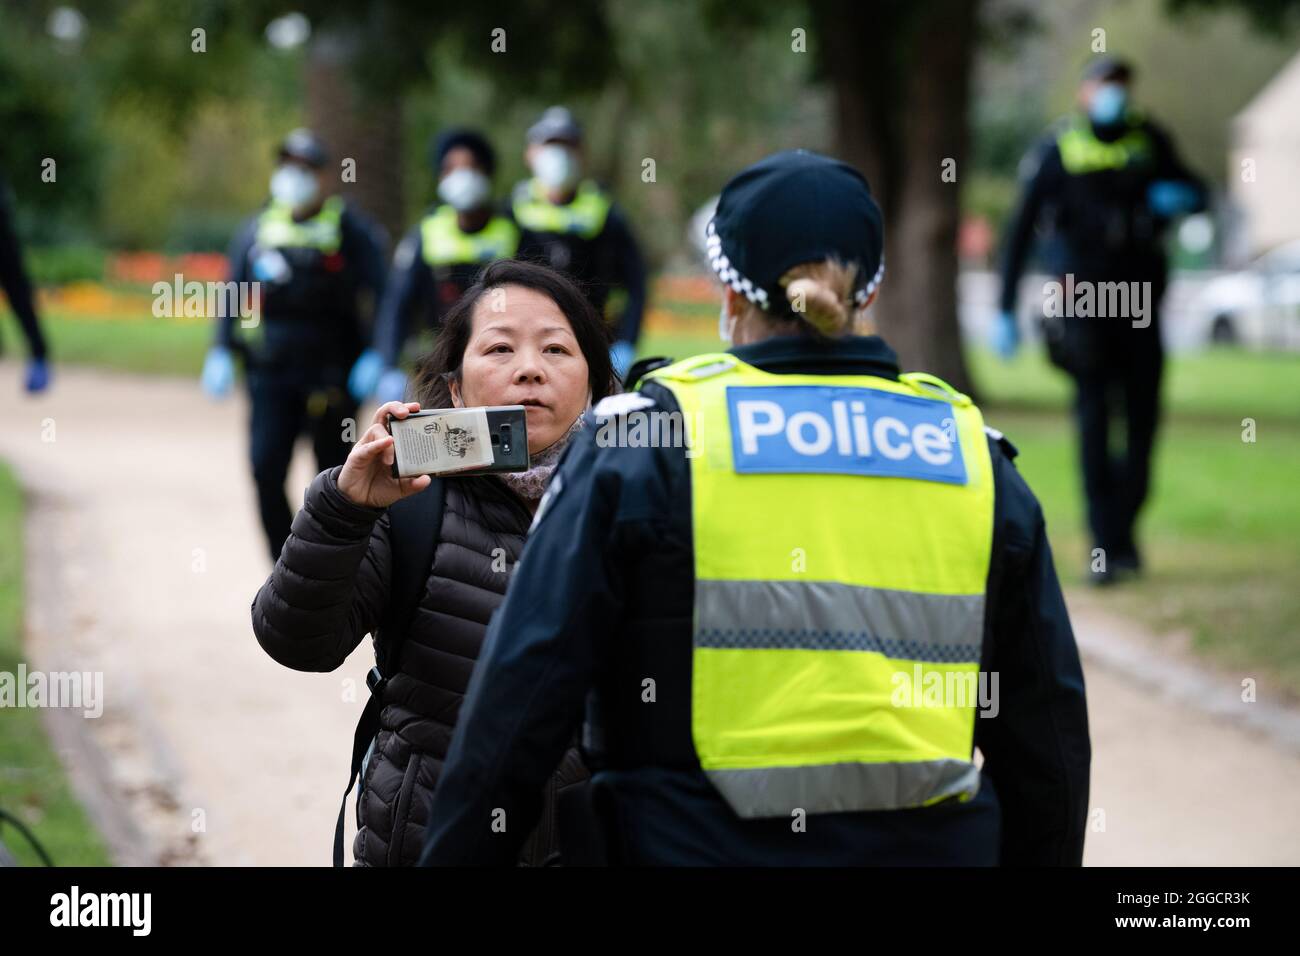 Melbourne, Australia, 31 August, 2021. A female protester films a police officer as she is questioned during a protest organised by Karen Brewer a New Zealand proprotor of Freemason conspiracy theory's, most demonstrators were detained and fined before a protest could take place. Credit: Michael Currie/Speed Media/Alamy Live News Stock Photo